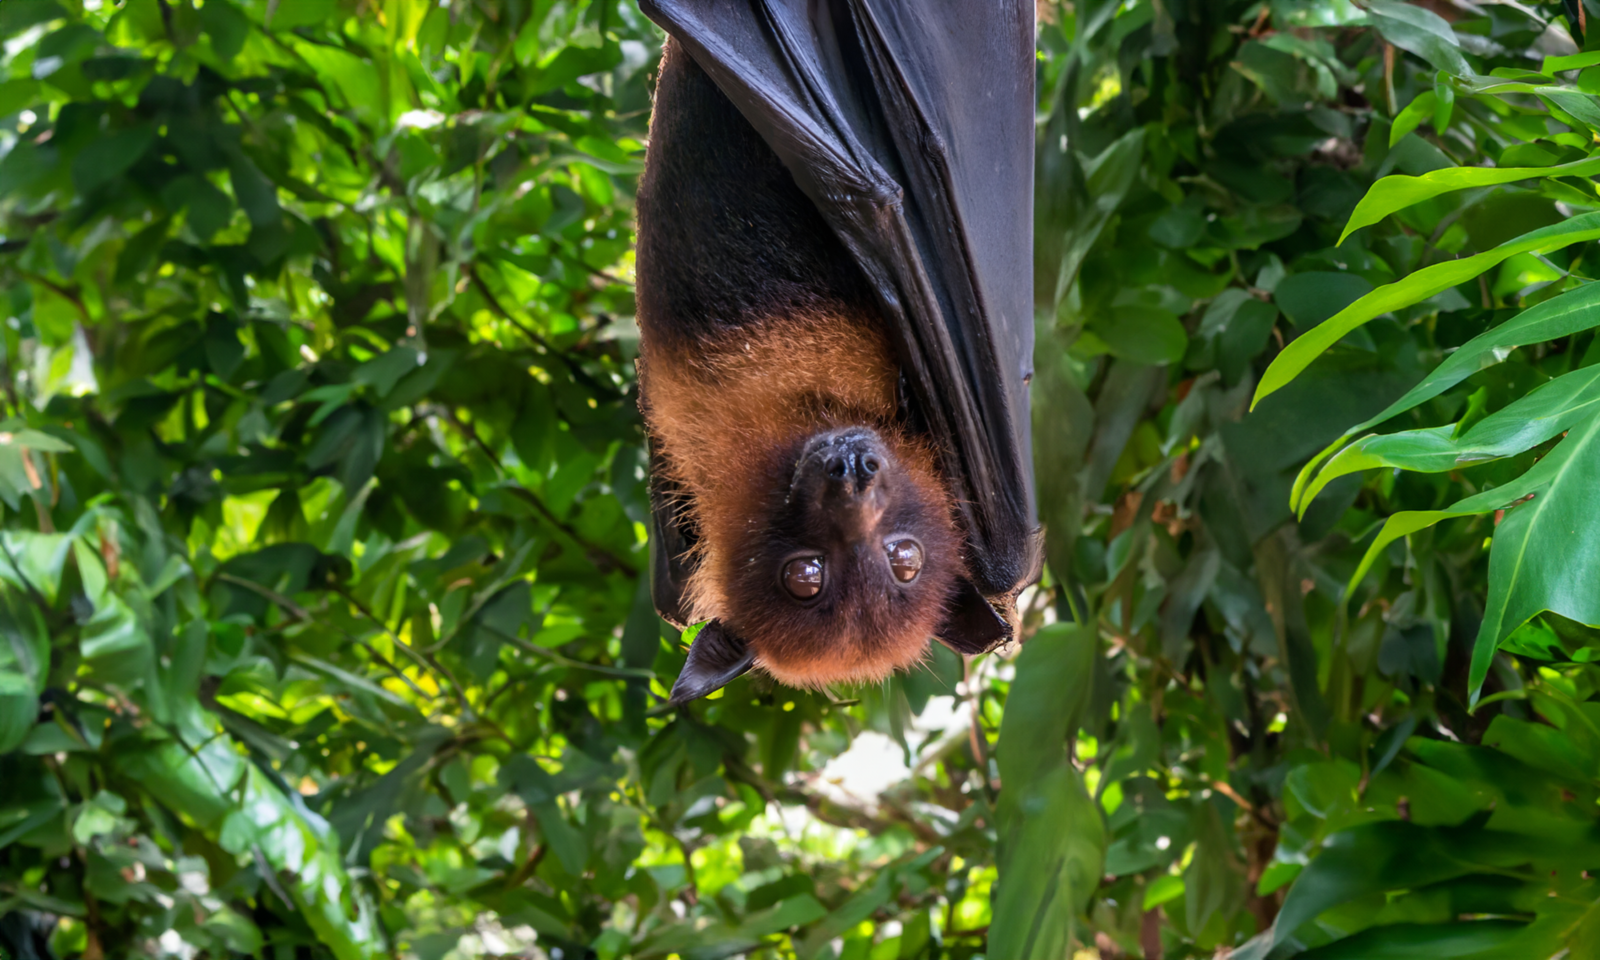 Pemba flying fox. ⁠Image Credit: By Wirestock from Getty Images via Canva Pro.